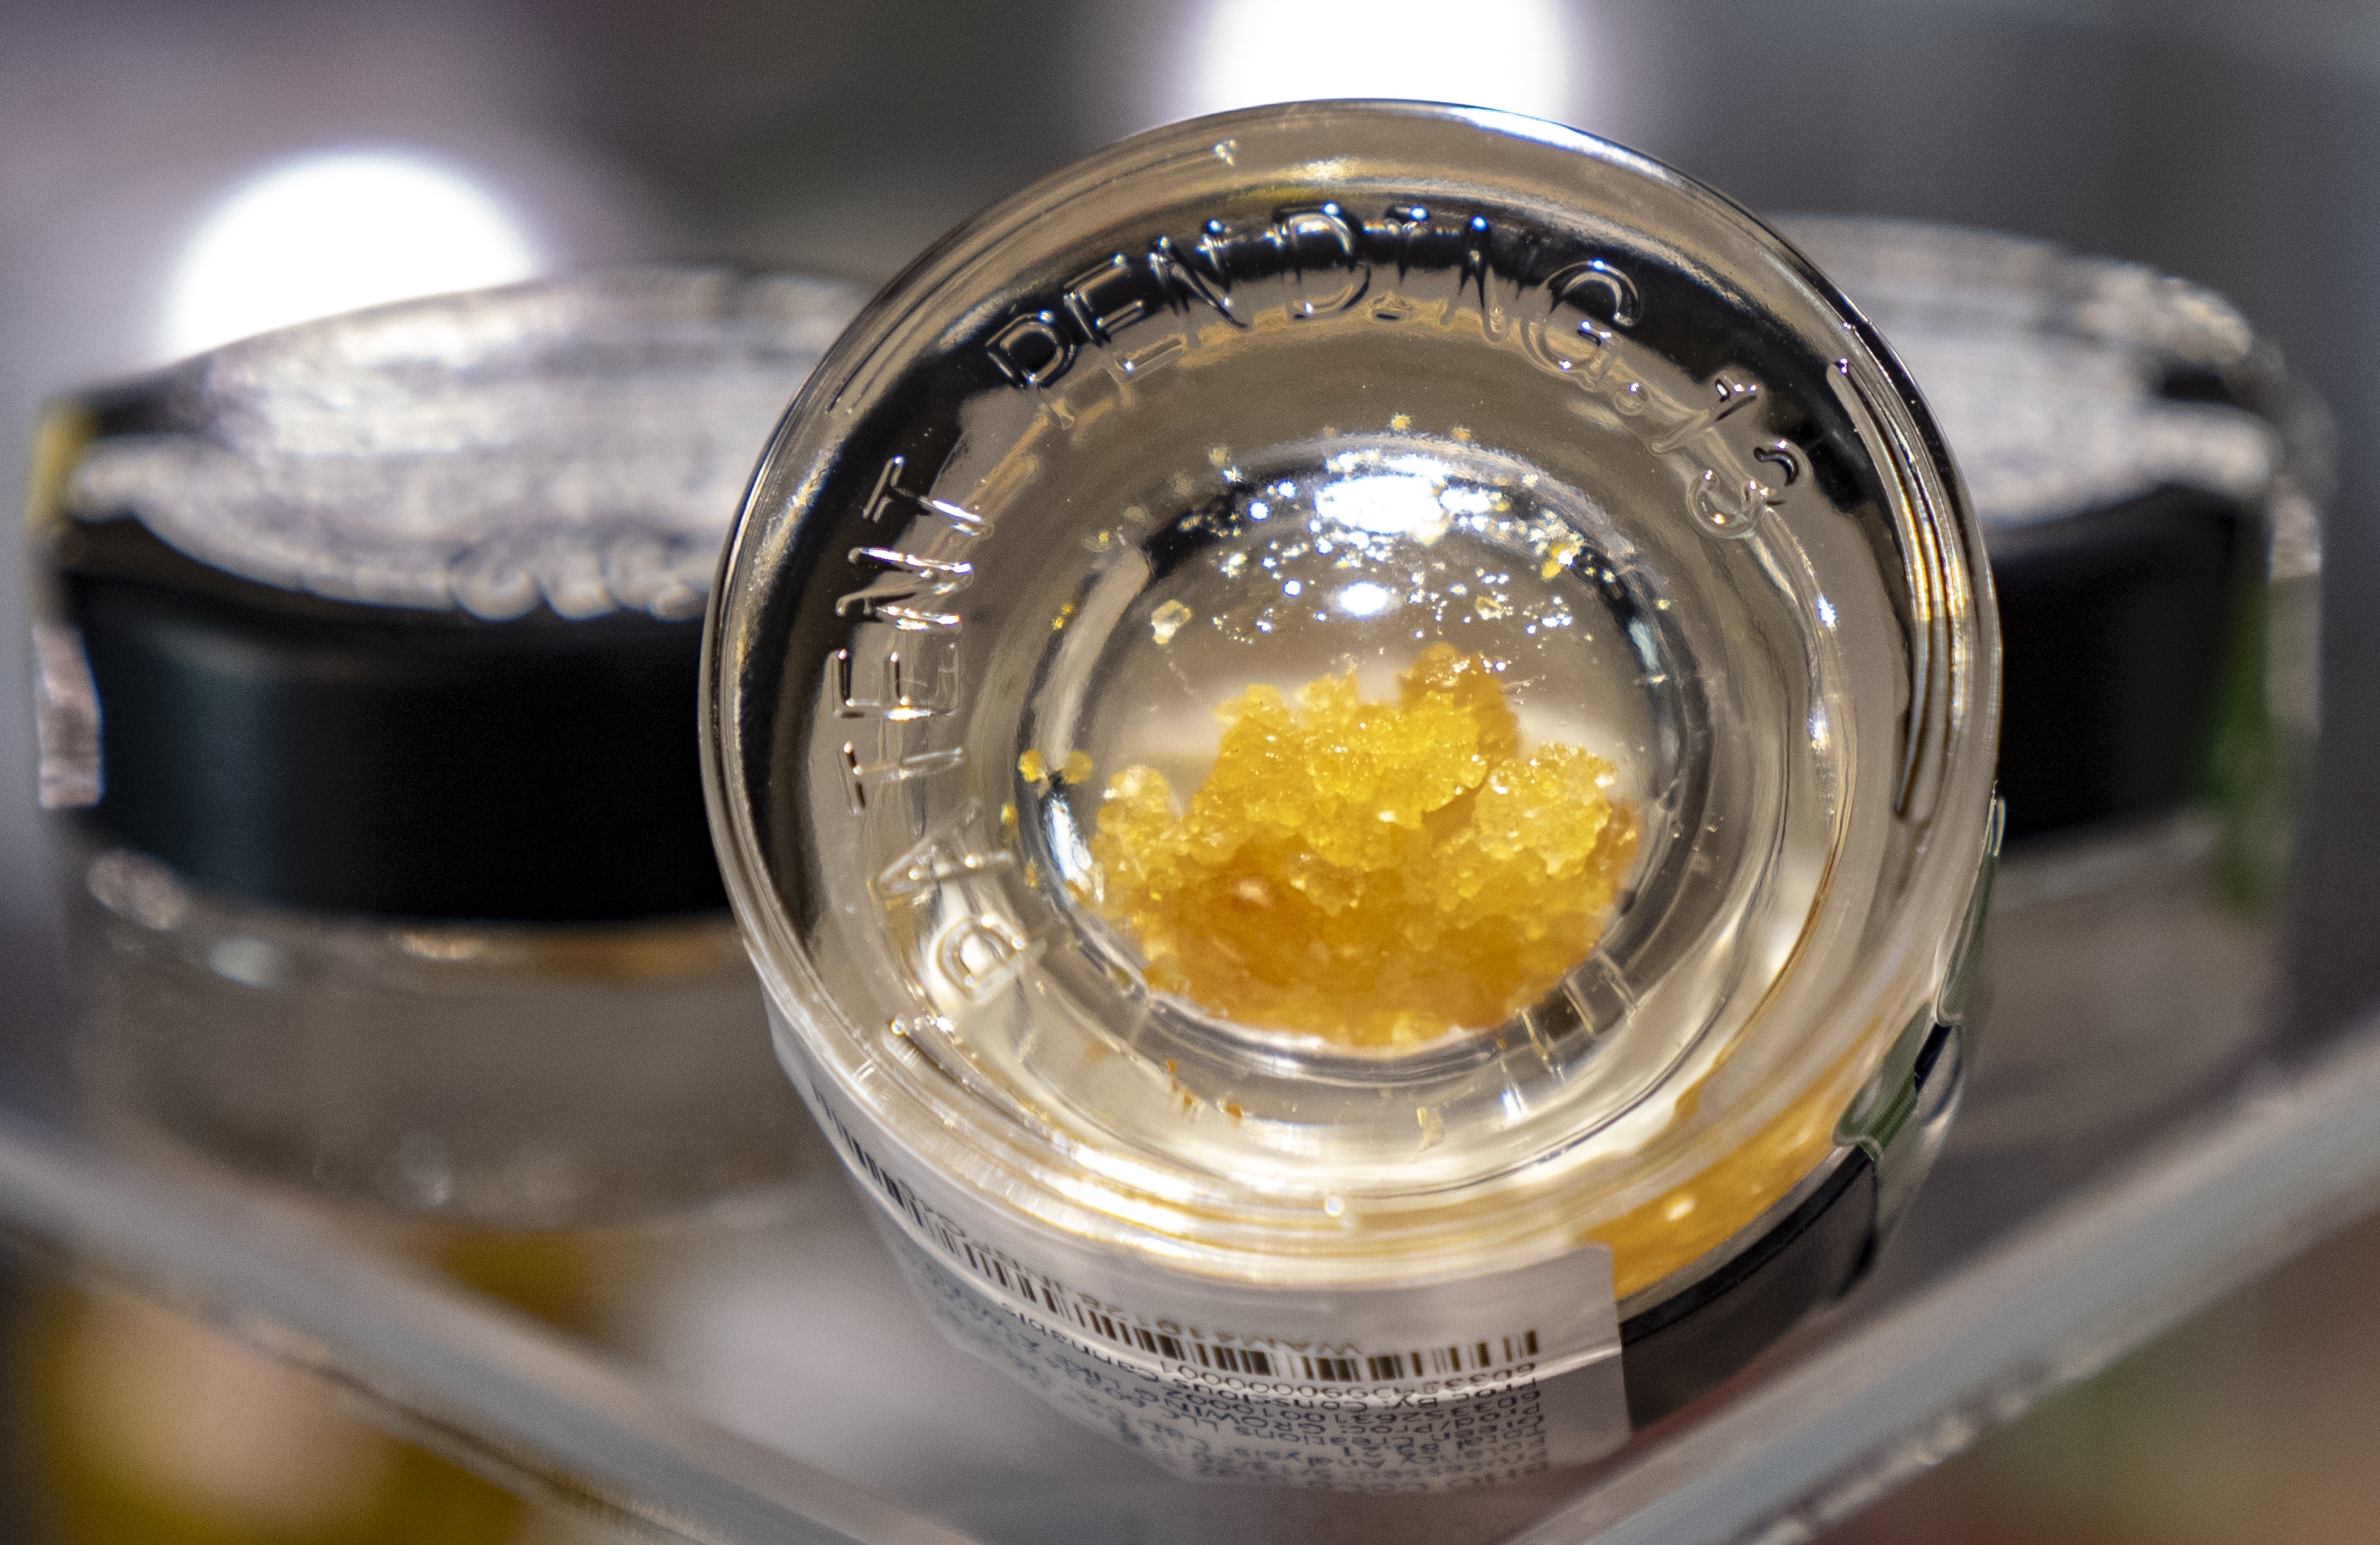 Black Market Extracts Cannabis Concentrate Bottom of Jar